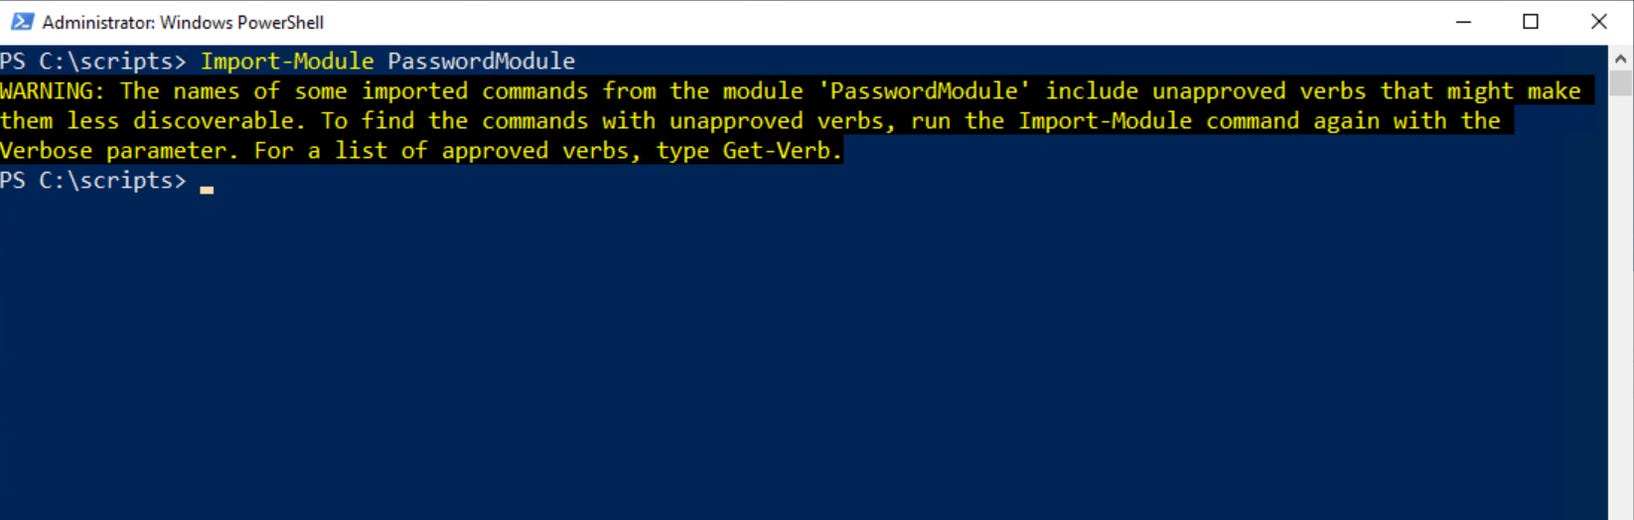 PowerShell showing an example of a warning message after entering Import-Module PasswordModule command